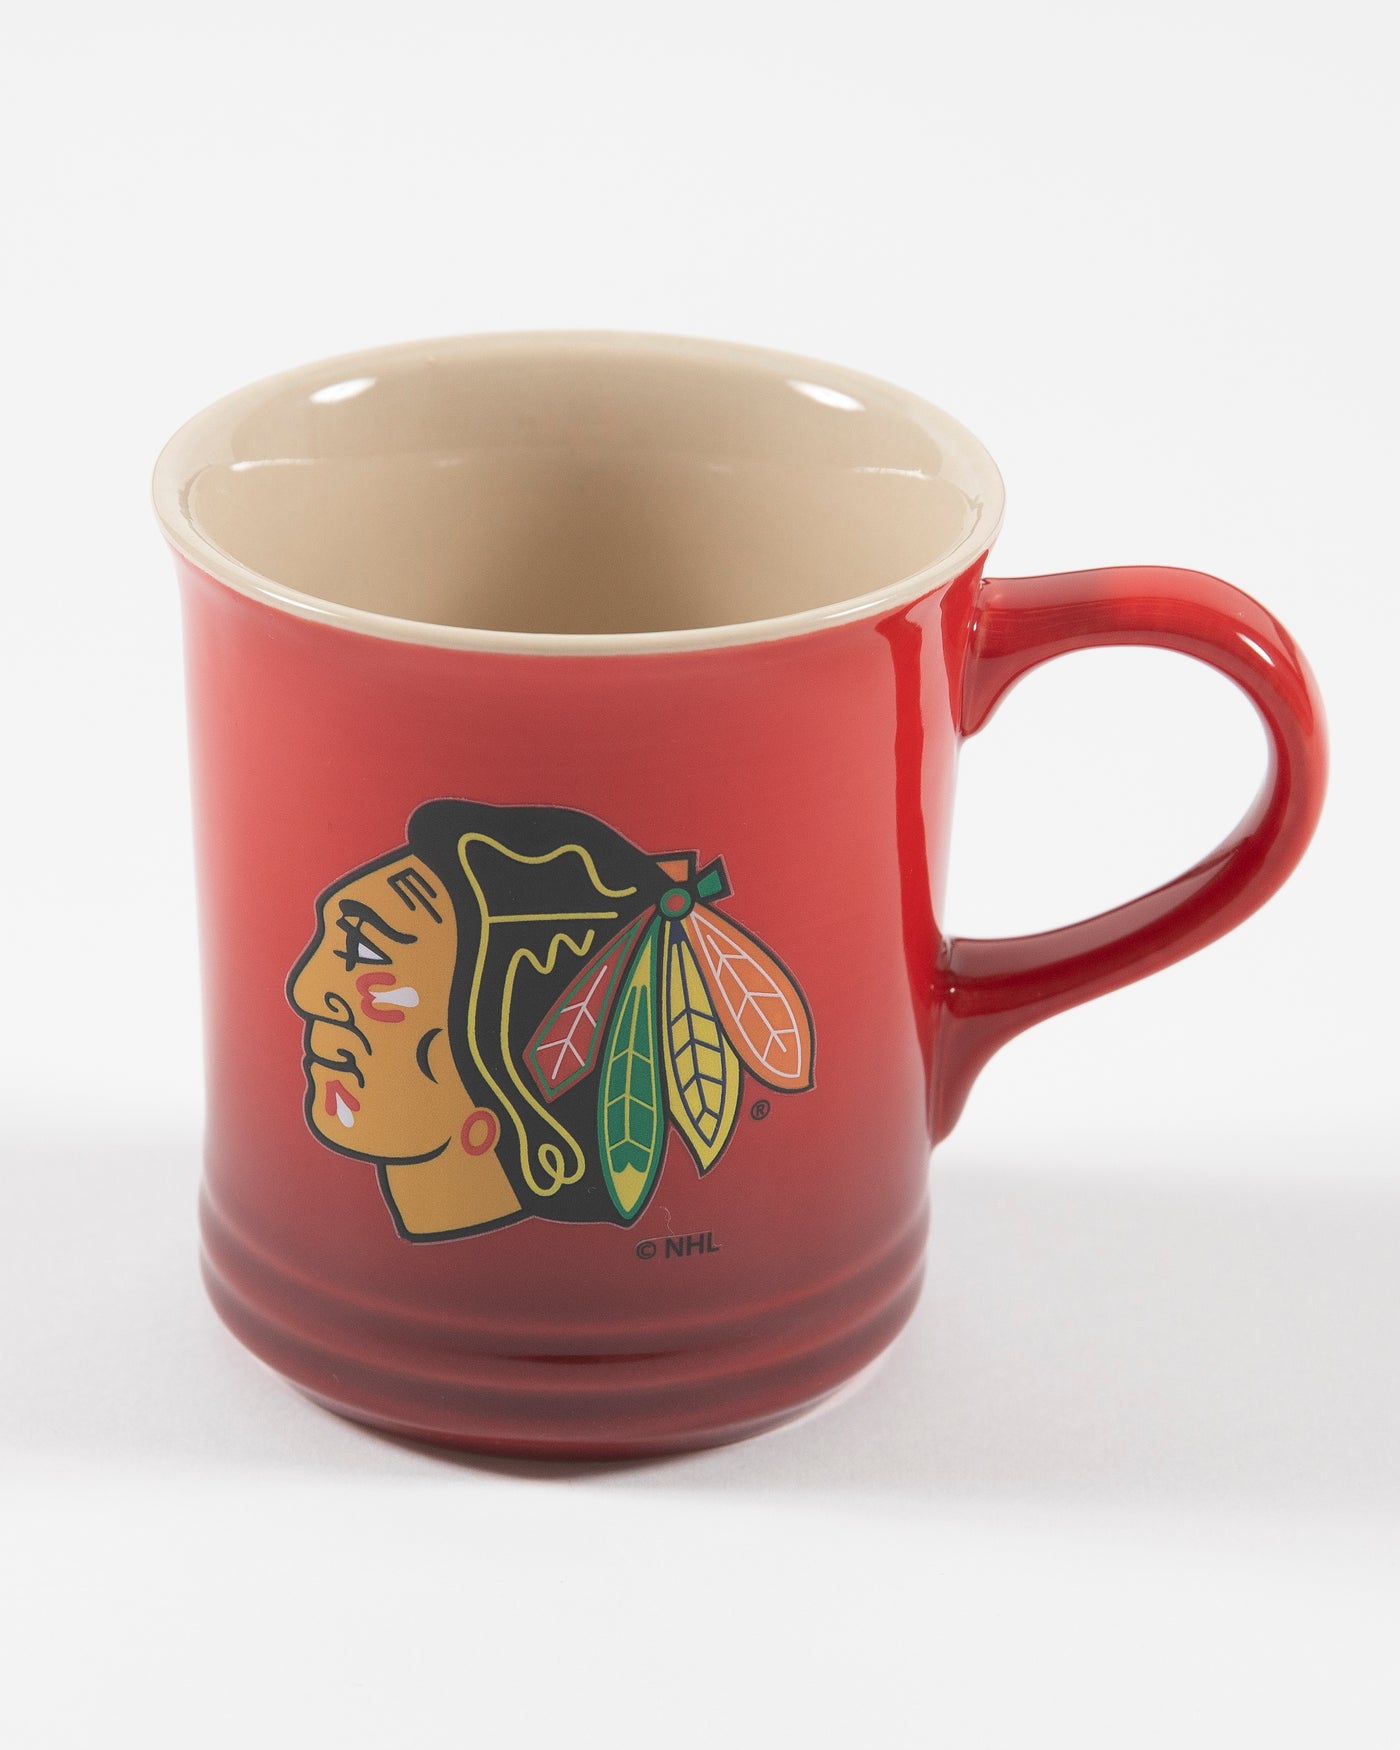 red and black gradient Chicago Blackhawks mug - front lay flat